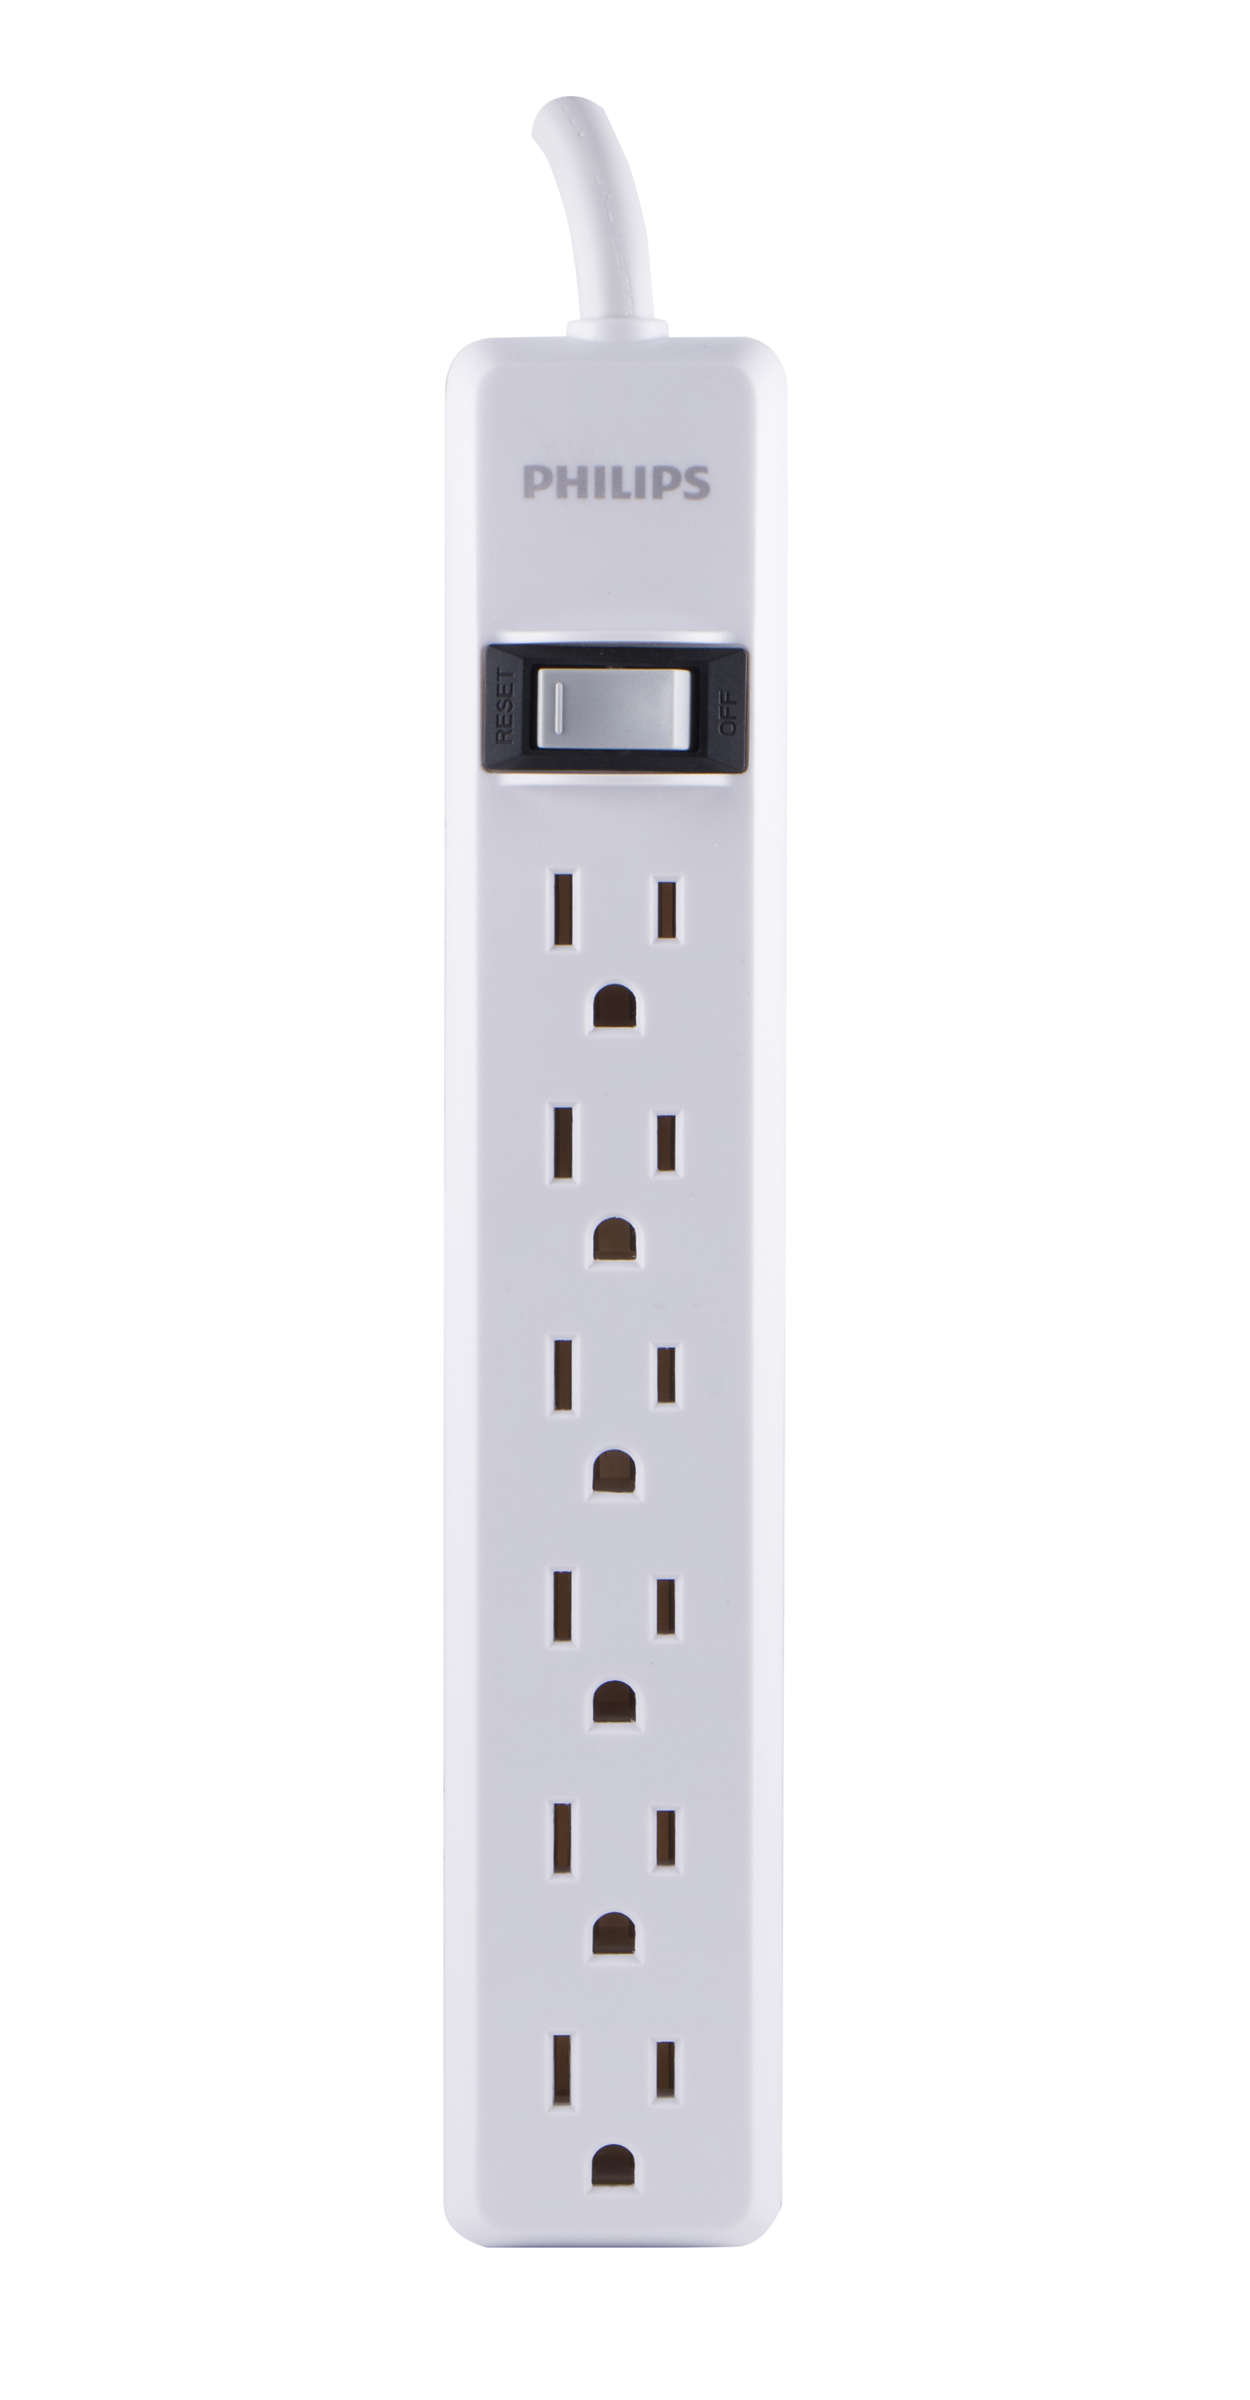 Powerful 6 outlet surge solution